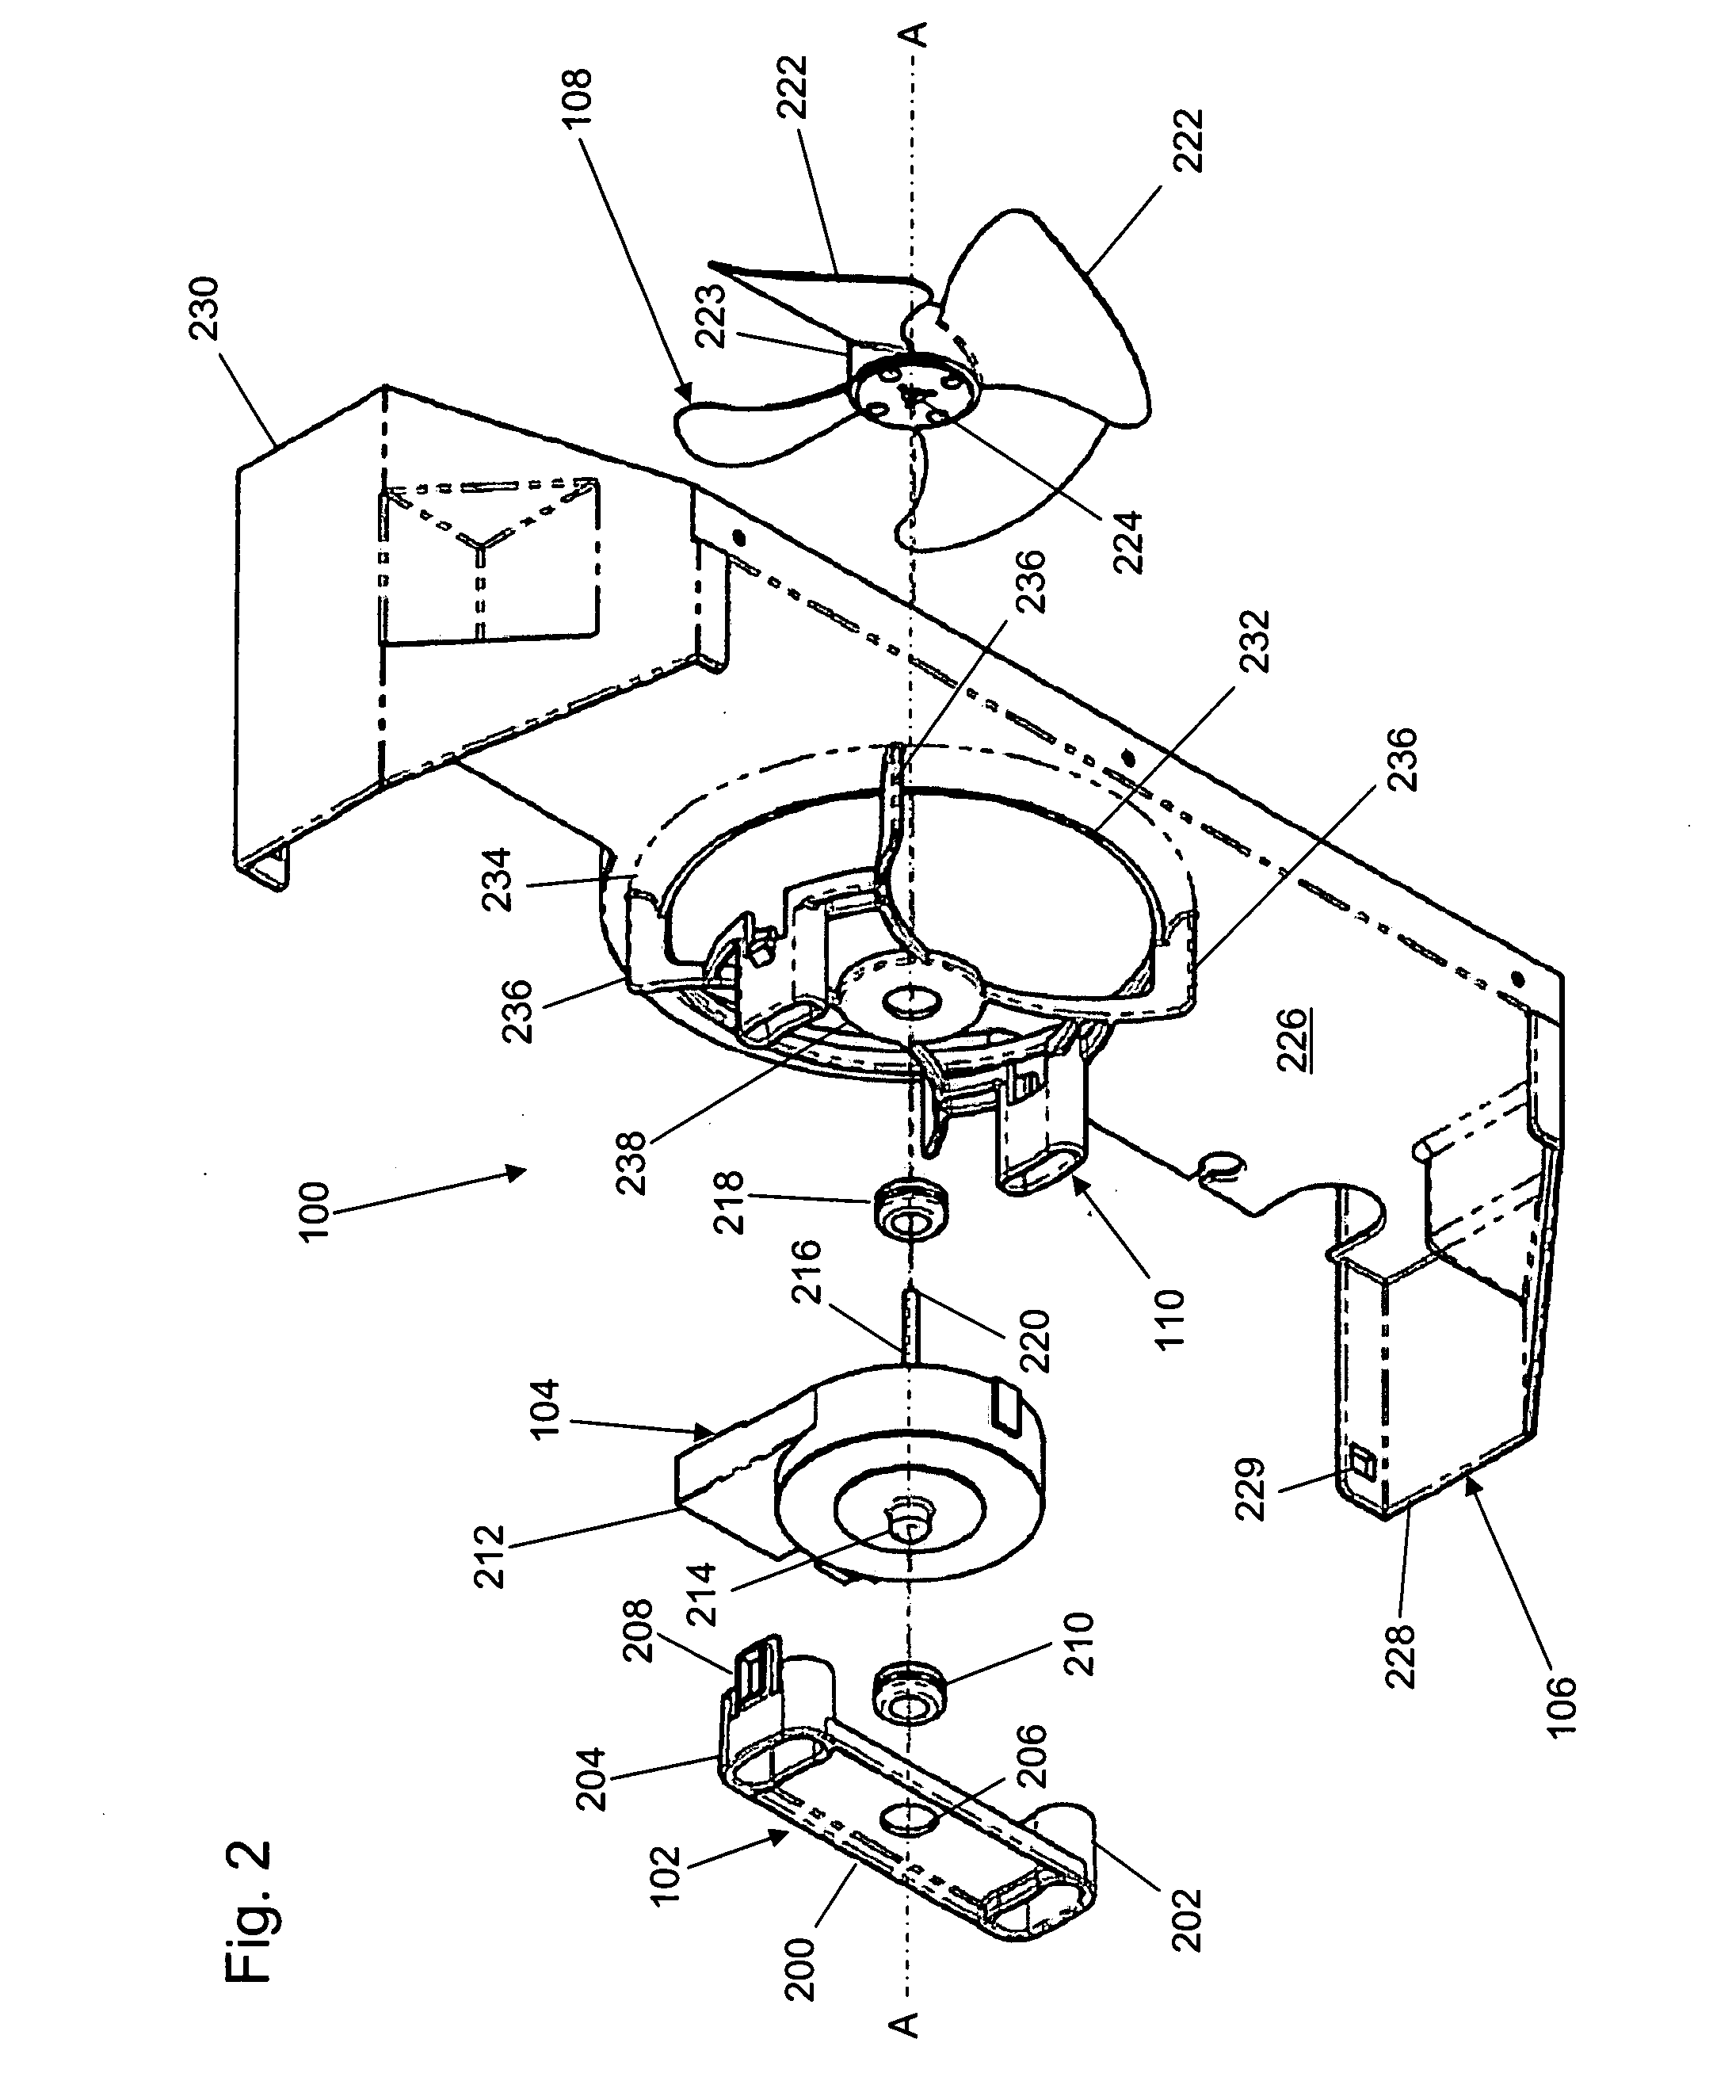 Evaporator fan with shroud assembly